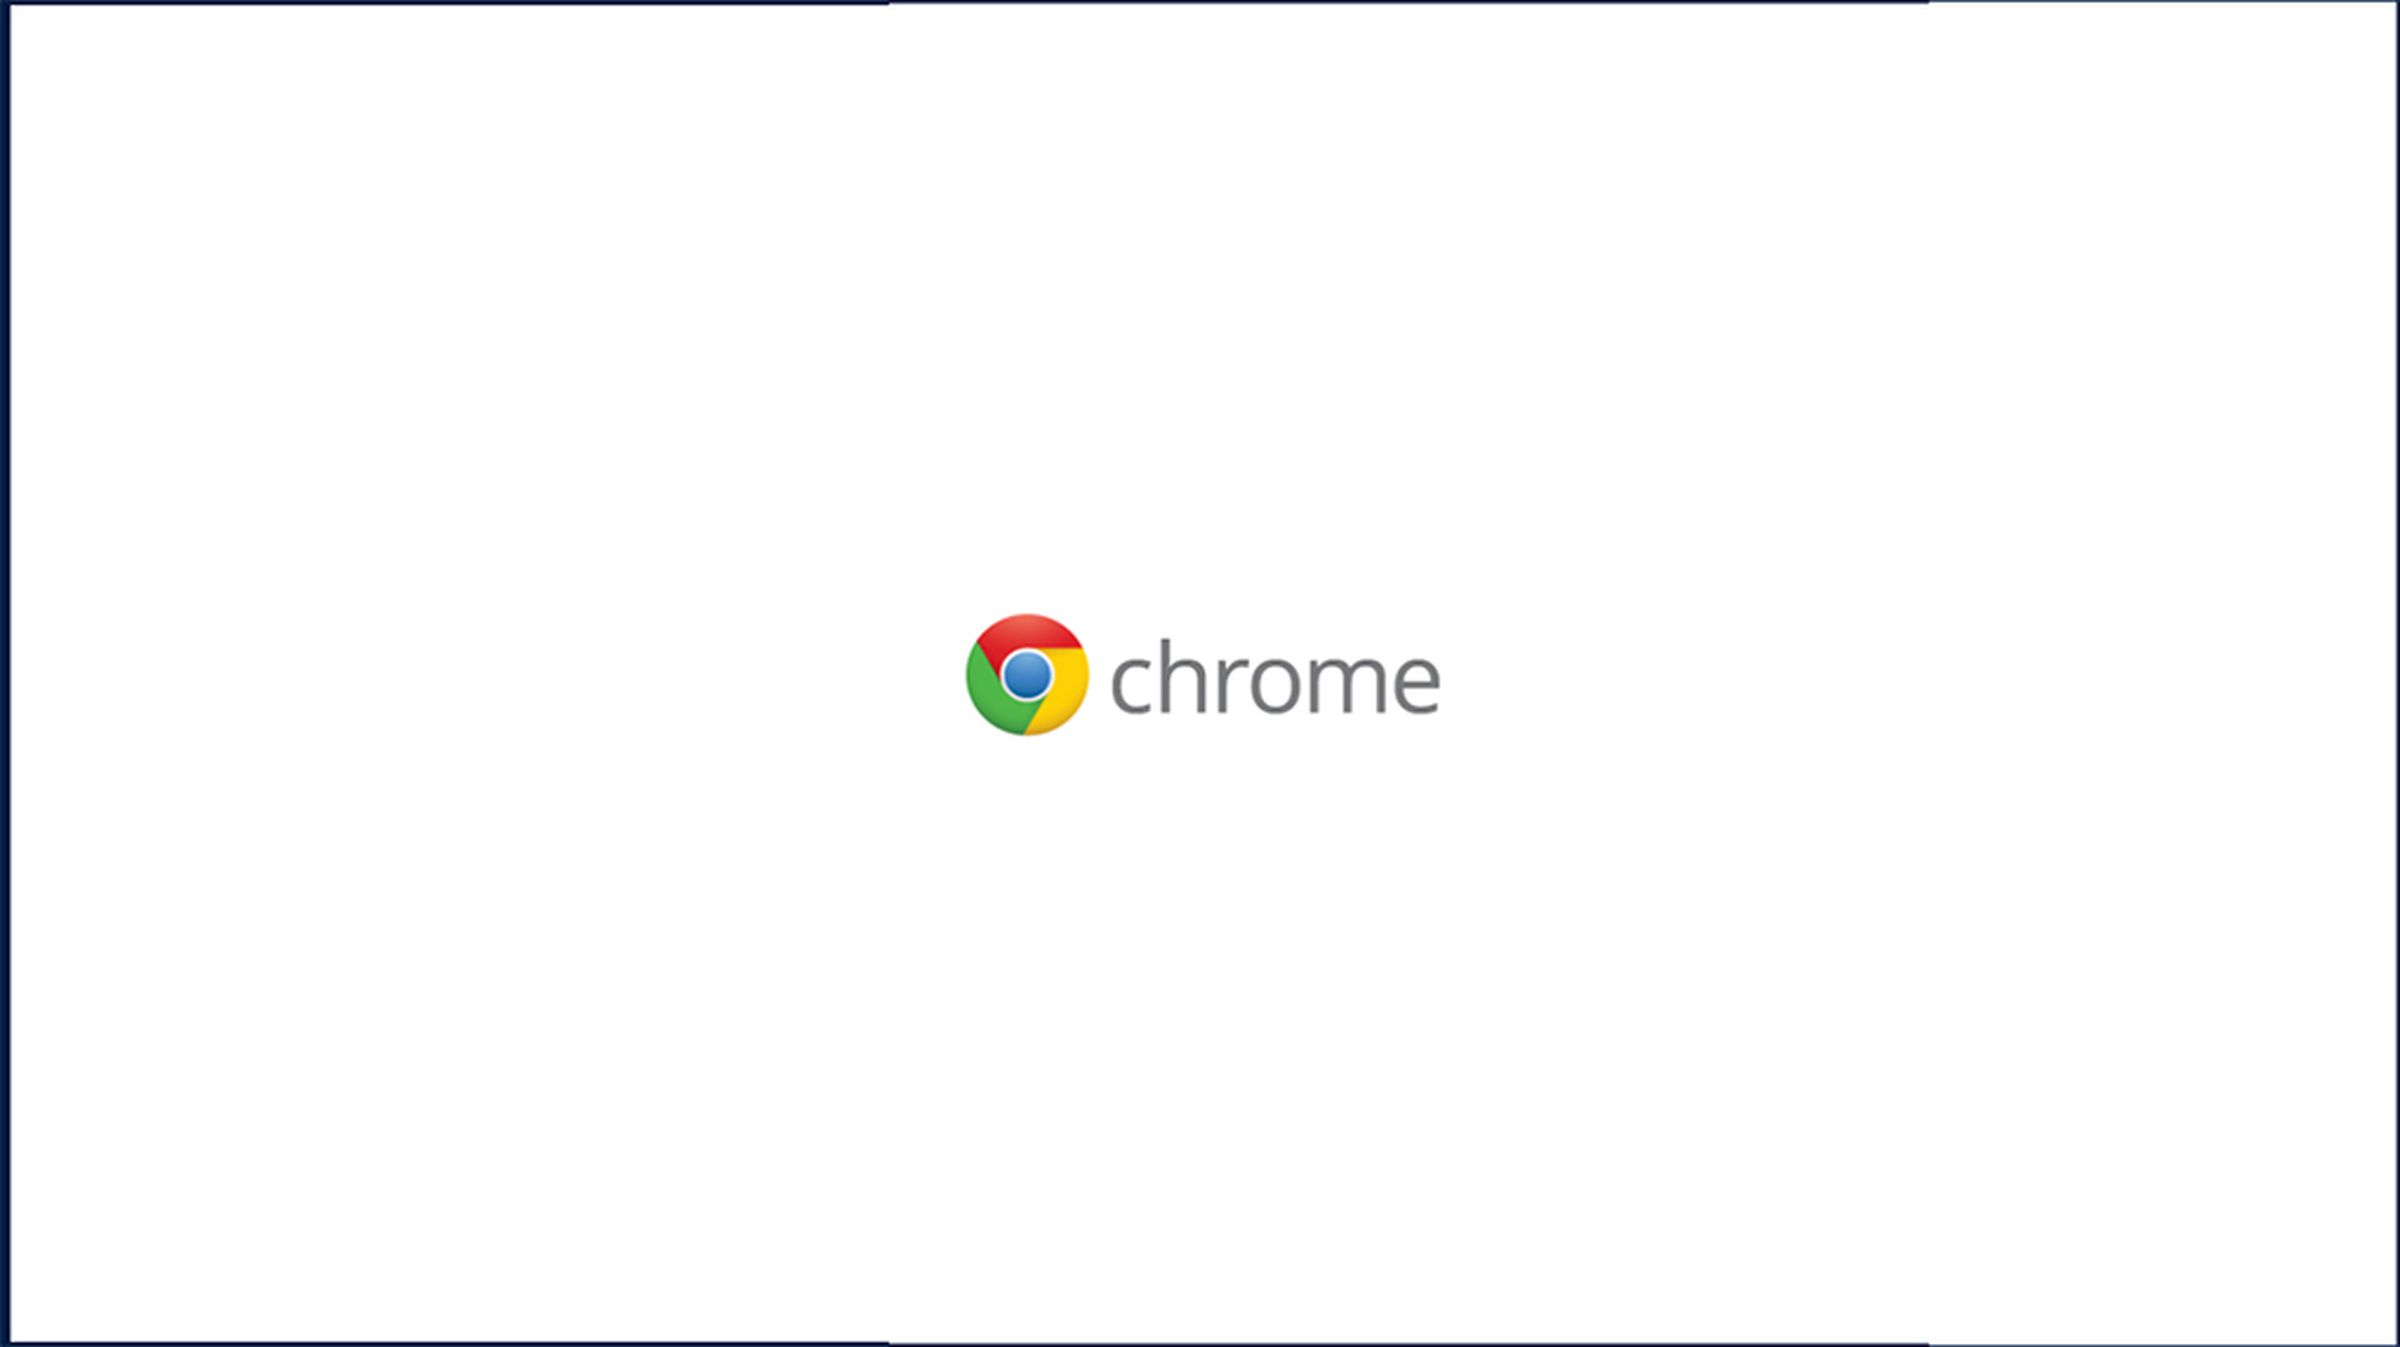 Chrome Metro style Windows 8 browser pictures